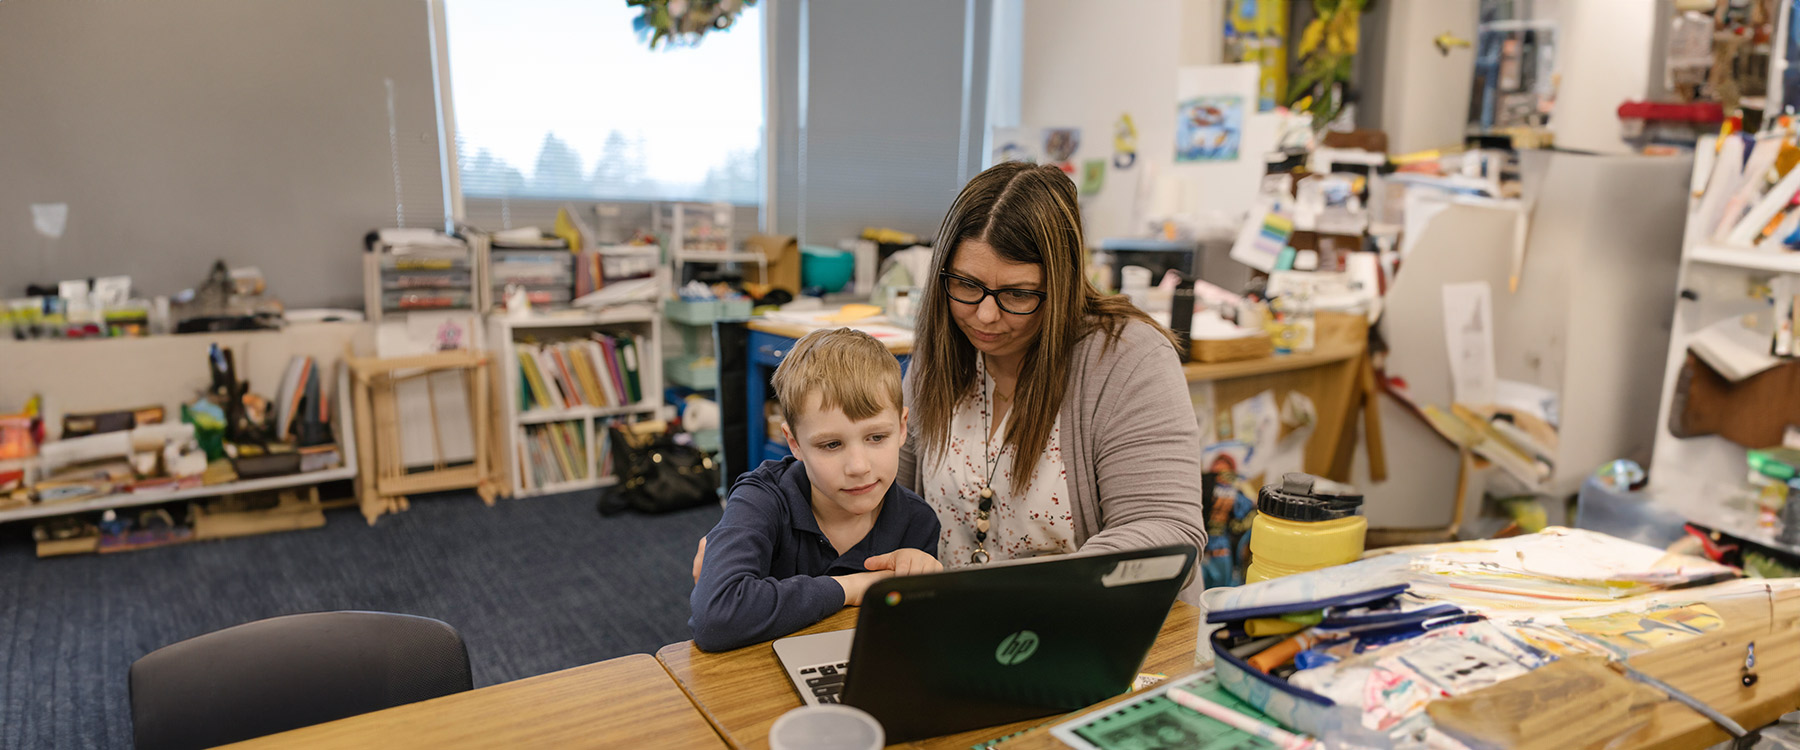 A teacher helps an elementary student use a laptop in a colorful classroom.